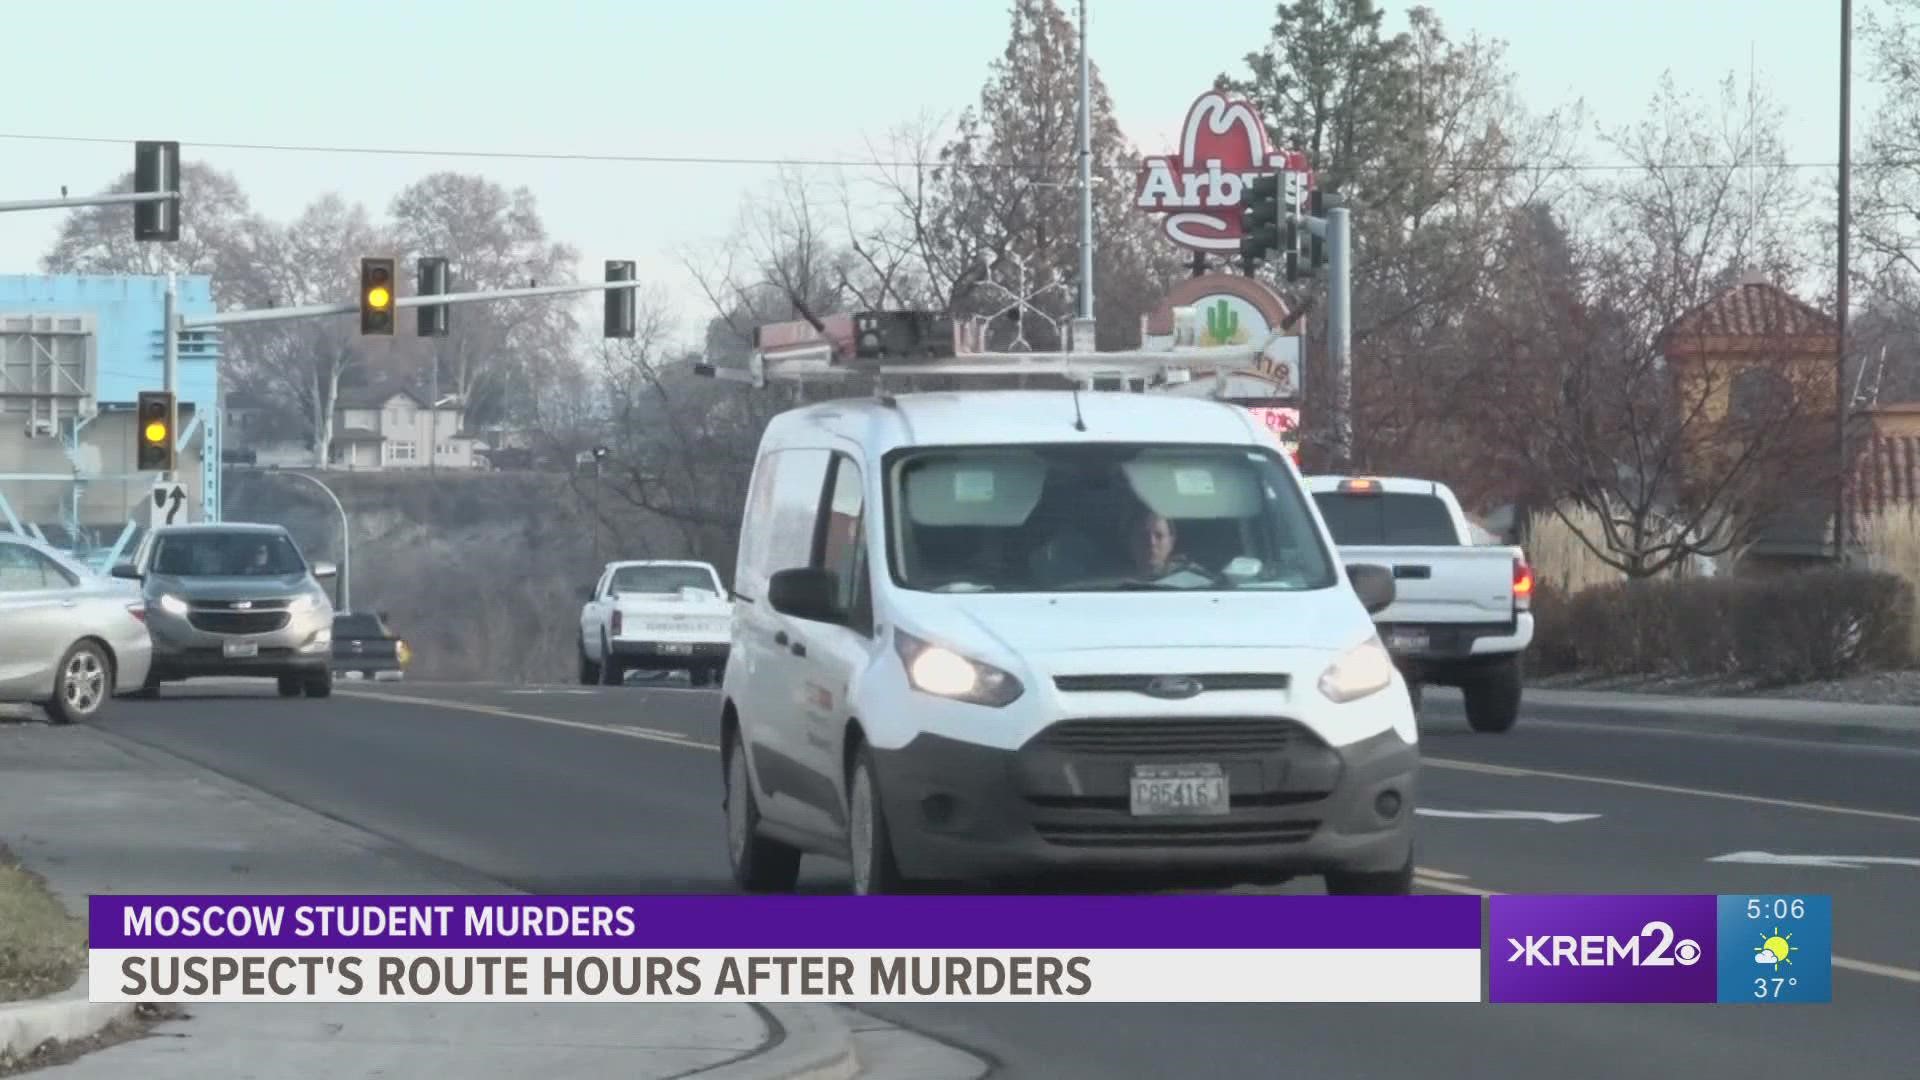 Police say cell phone records show the suspect traveled 35 miles away from Pullman just hours after the murders.